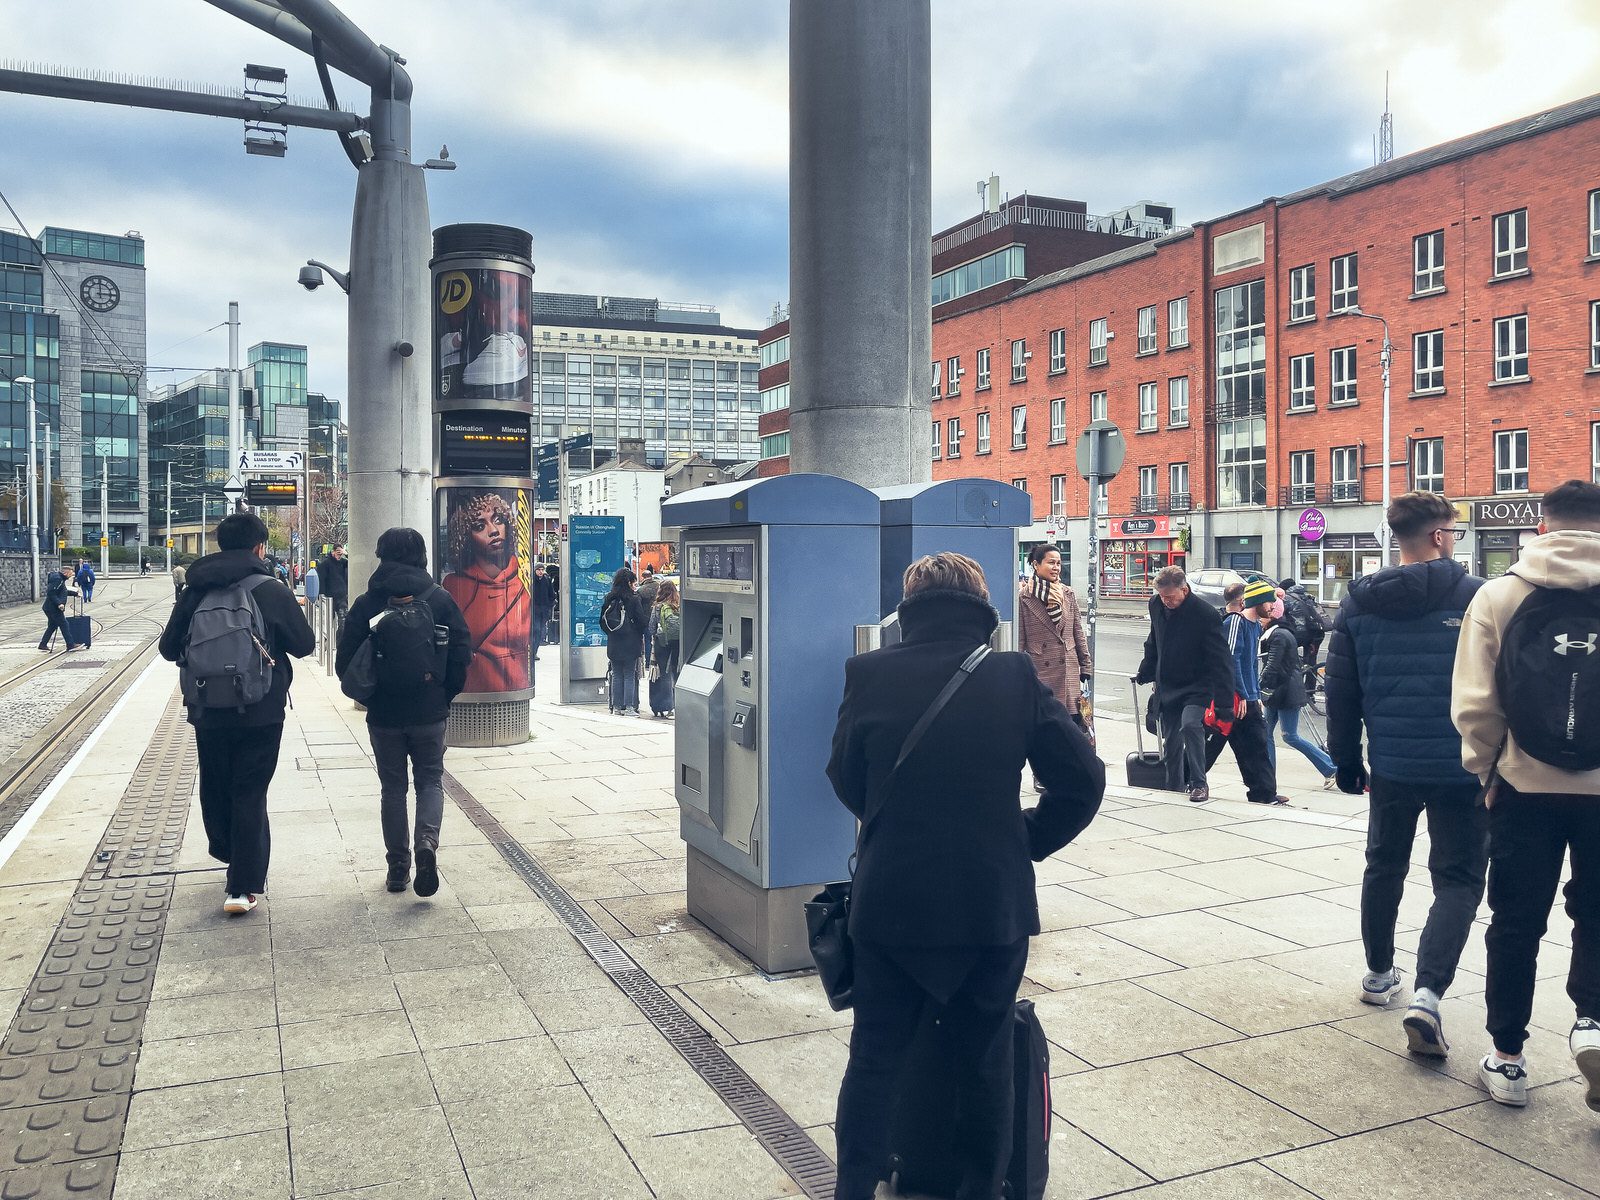 AS THE BUS AND TRAM SERVICES WERE SUSPENDED IN THE CITY CENTRE [I WENT TO CONNOLLY STATION AND TRAVELLED BY DART]-225382-1